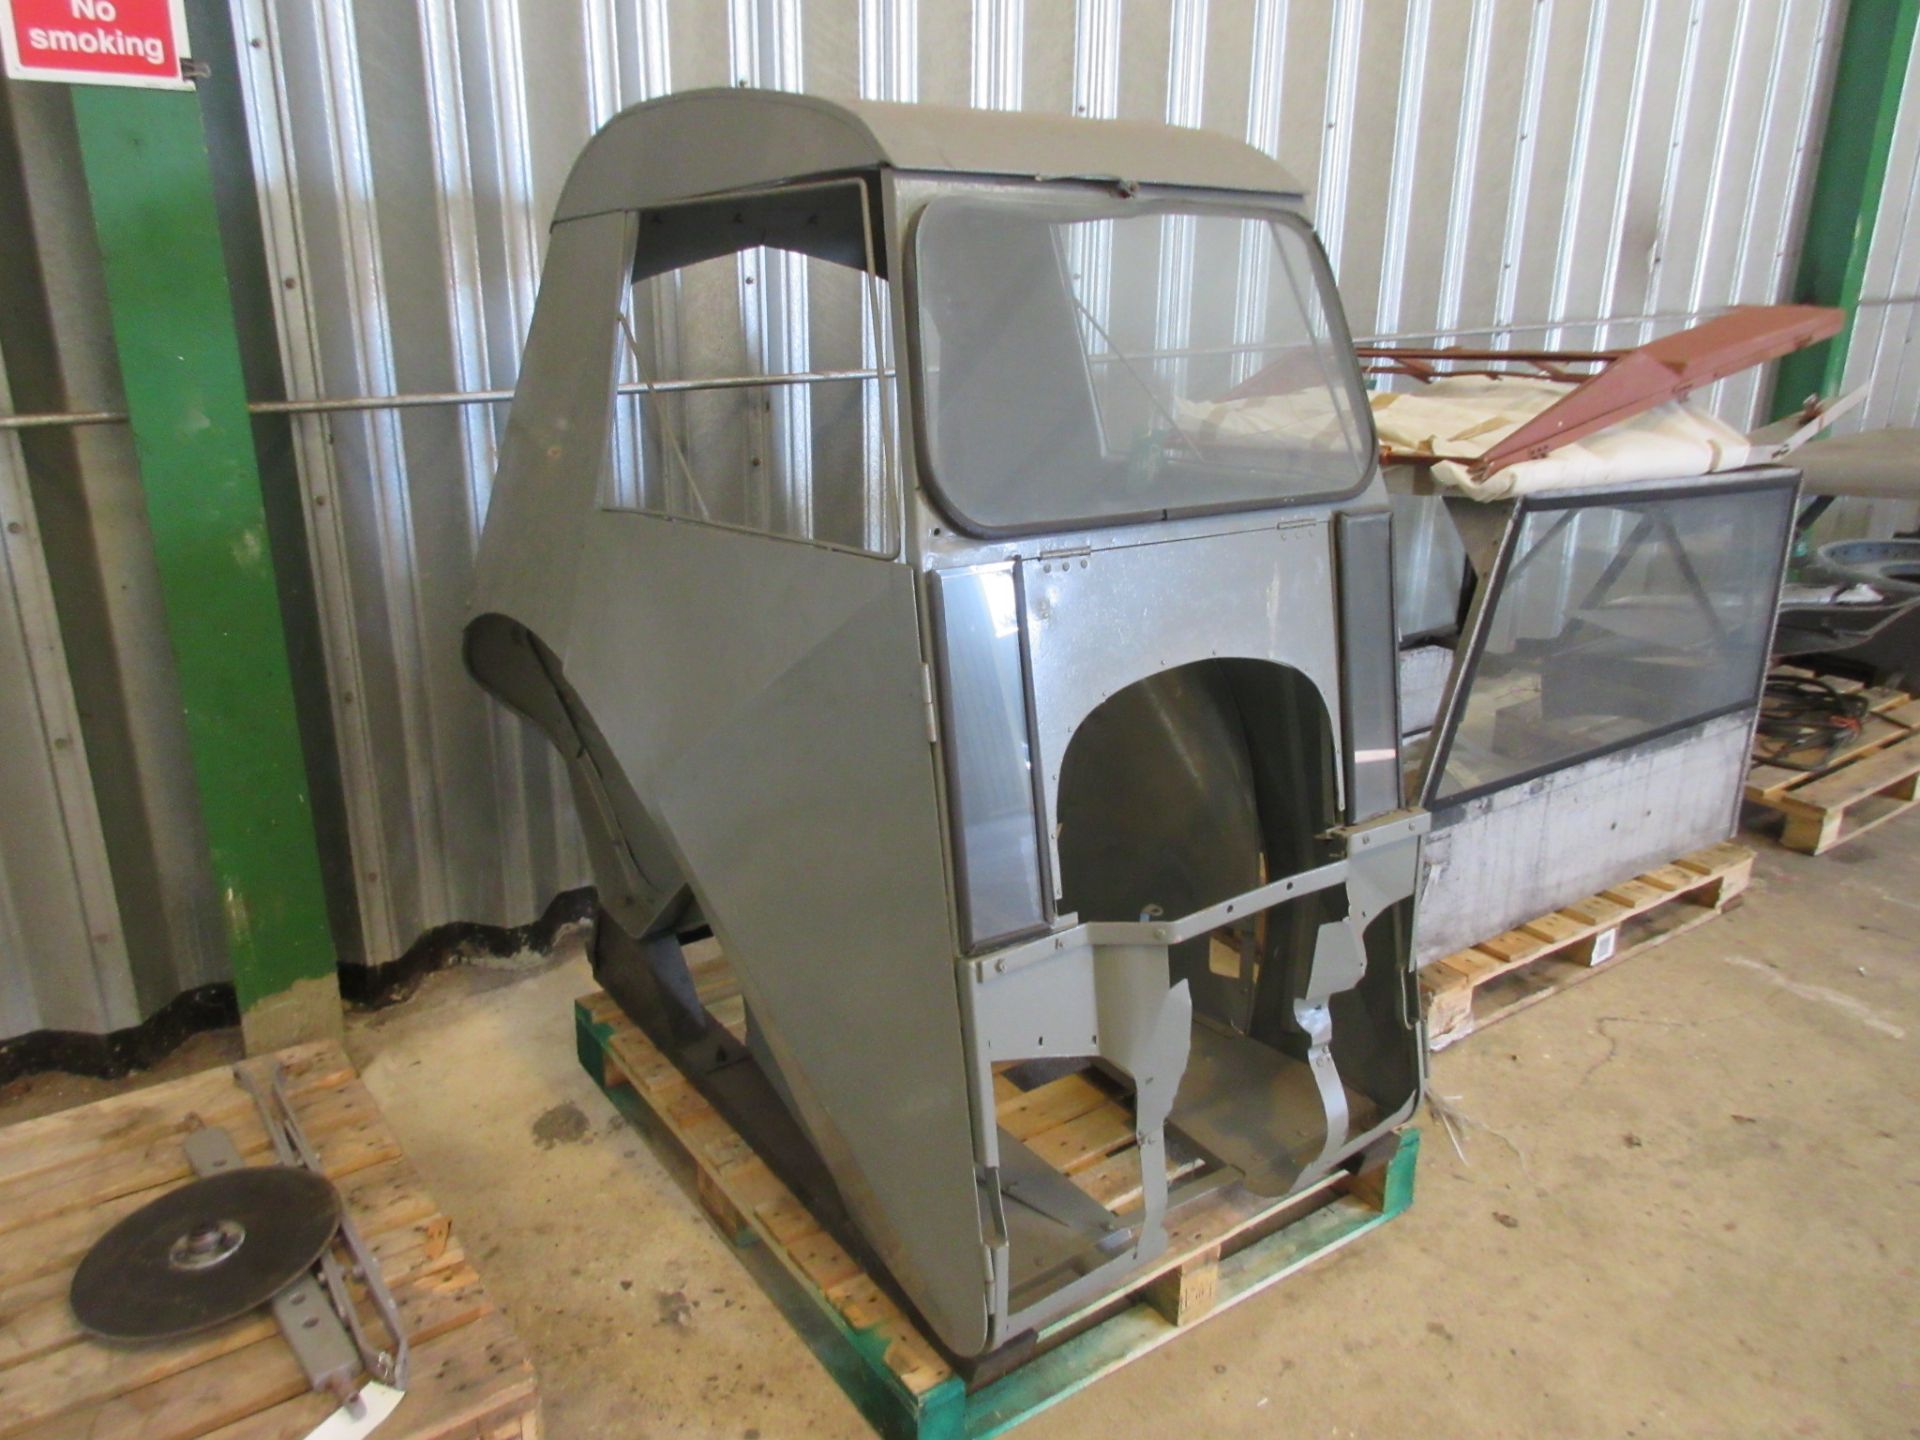 Scottish Aviation cab to fit a TE-20